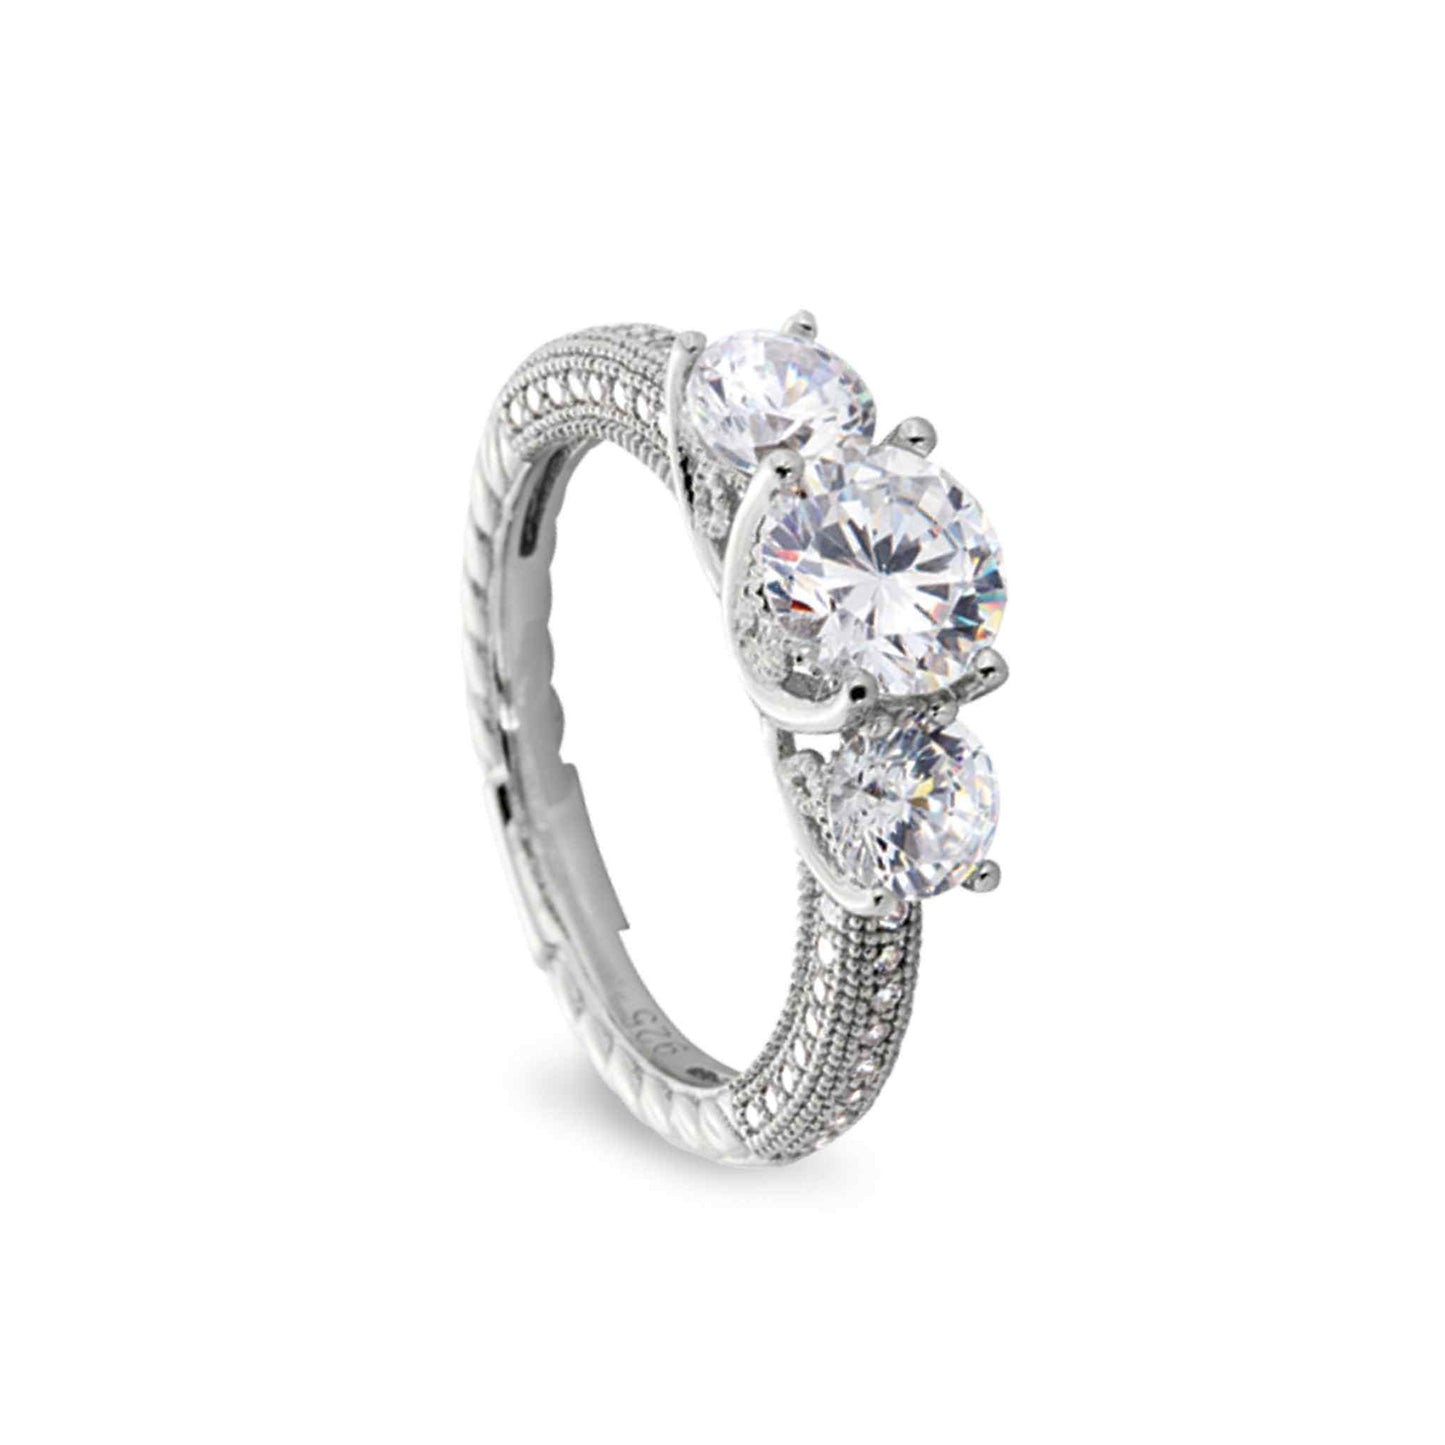 A three stone ring with 50 simulated diamonds displayed on a neutral white background.